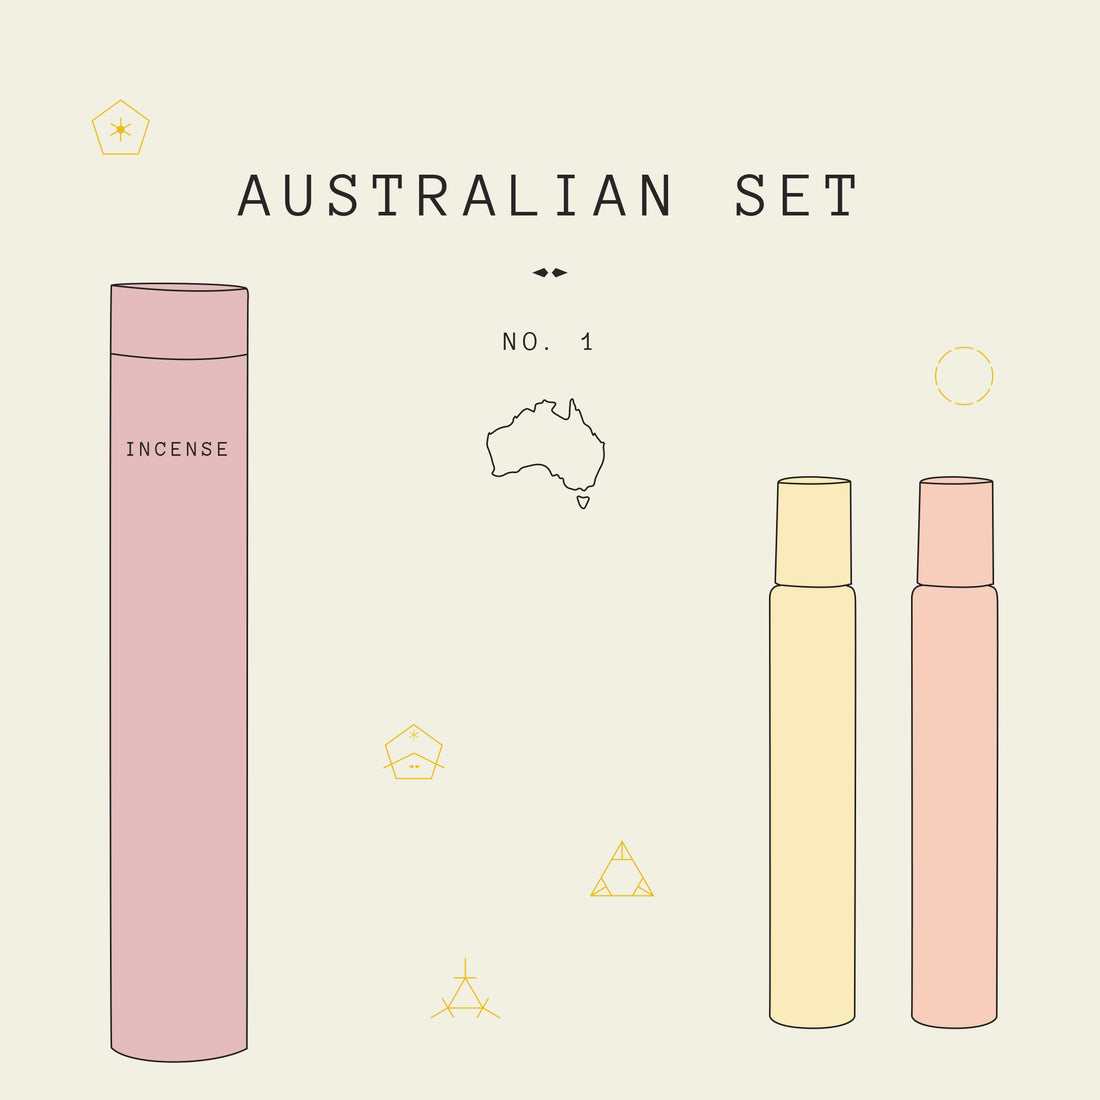 Australian 1 Gift Set is a curation of Australian products that have been inspired by Australian flora.  PRODUCTS INCLUDED:  ・Serene Body Health Red Desert Natural Perfume Roll On, 10ml ・Melis Navitus Spiritus Natural Perfume Roll On, 9ml ・Addition Studio Australian Native Incense  Eucalytpus & Acacia Cylinder 25 pieces